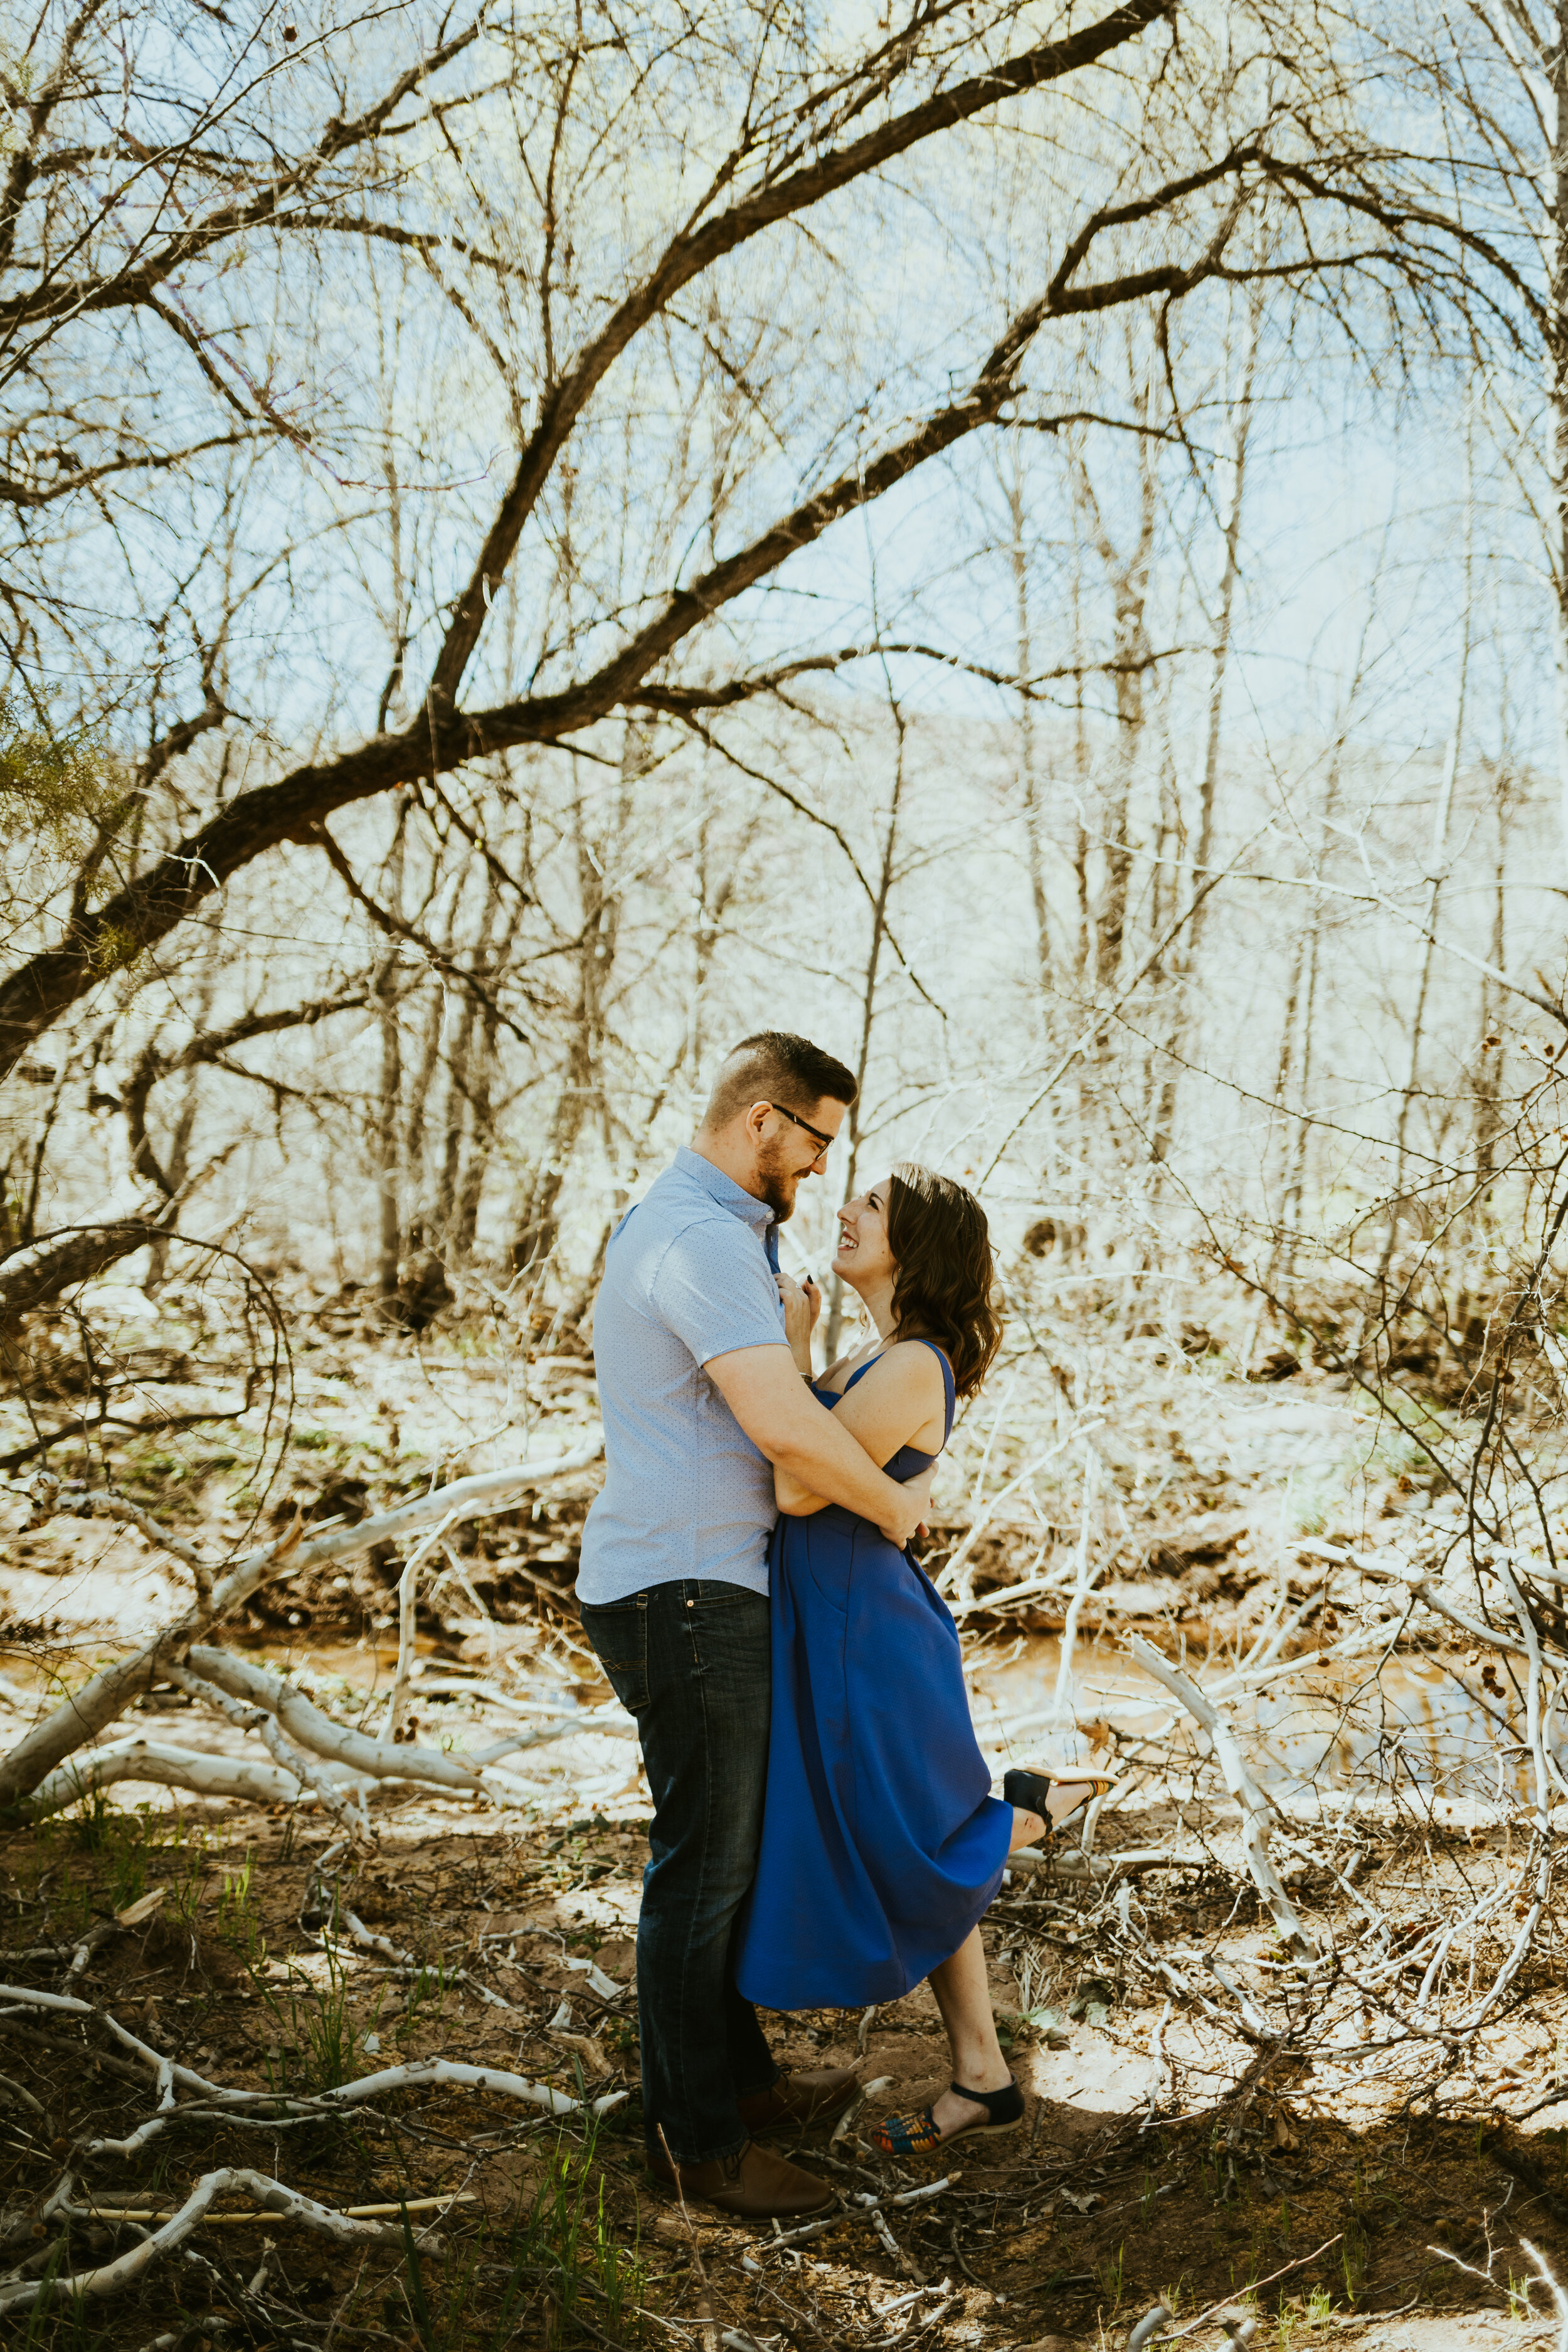 red rock crossing sedona arizona cathedral rock crescent moon ranch couple photos engagement photo outfit inspiration couple posing ideas midday photos-6.jpg